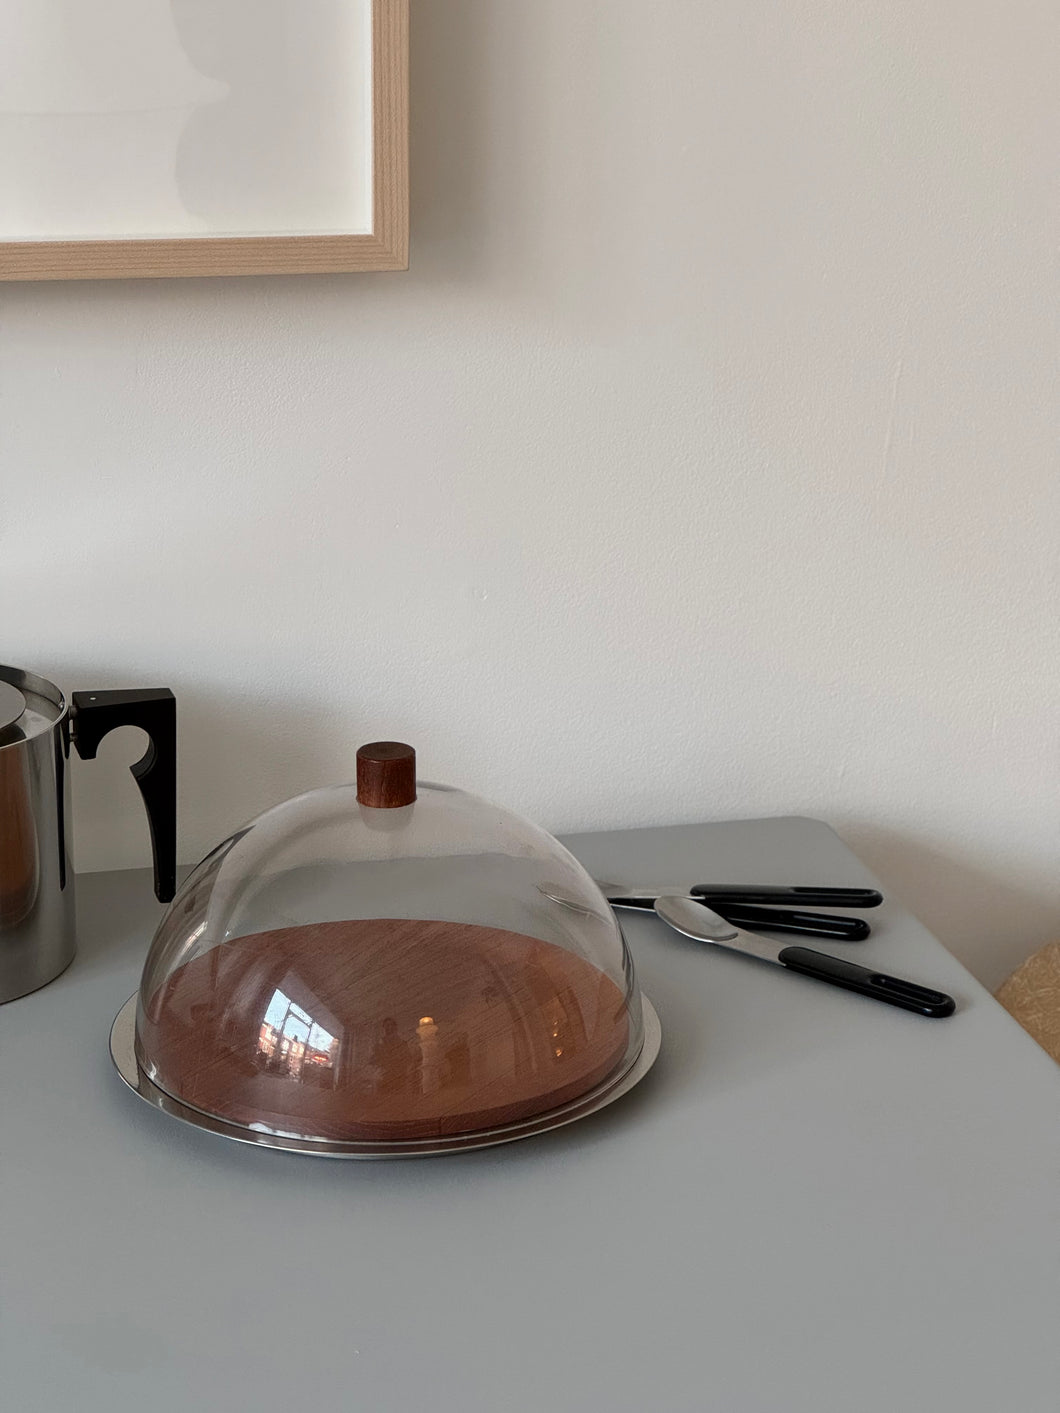 Cheese cloche by Stelton